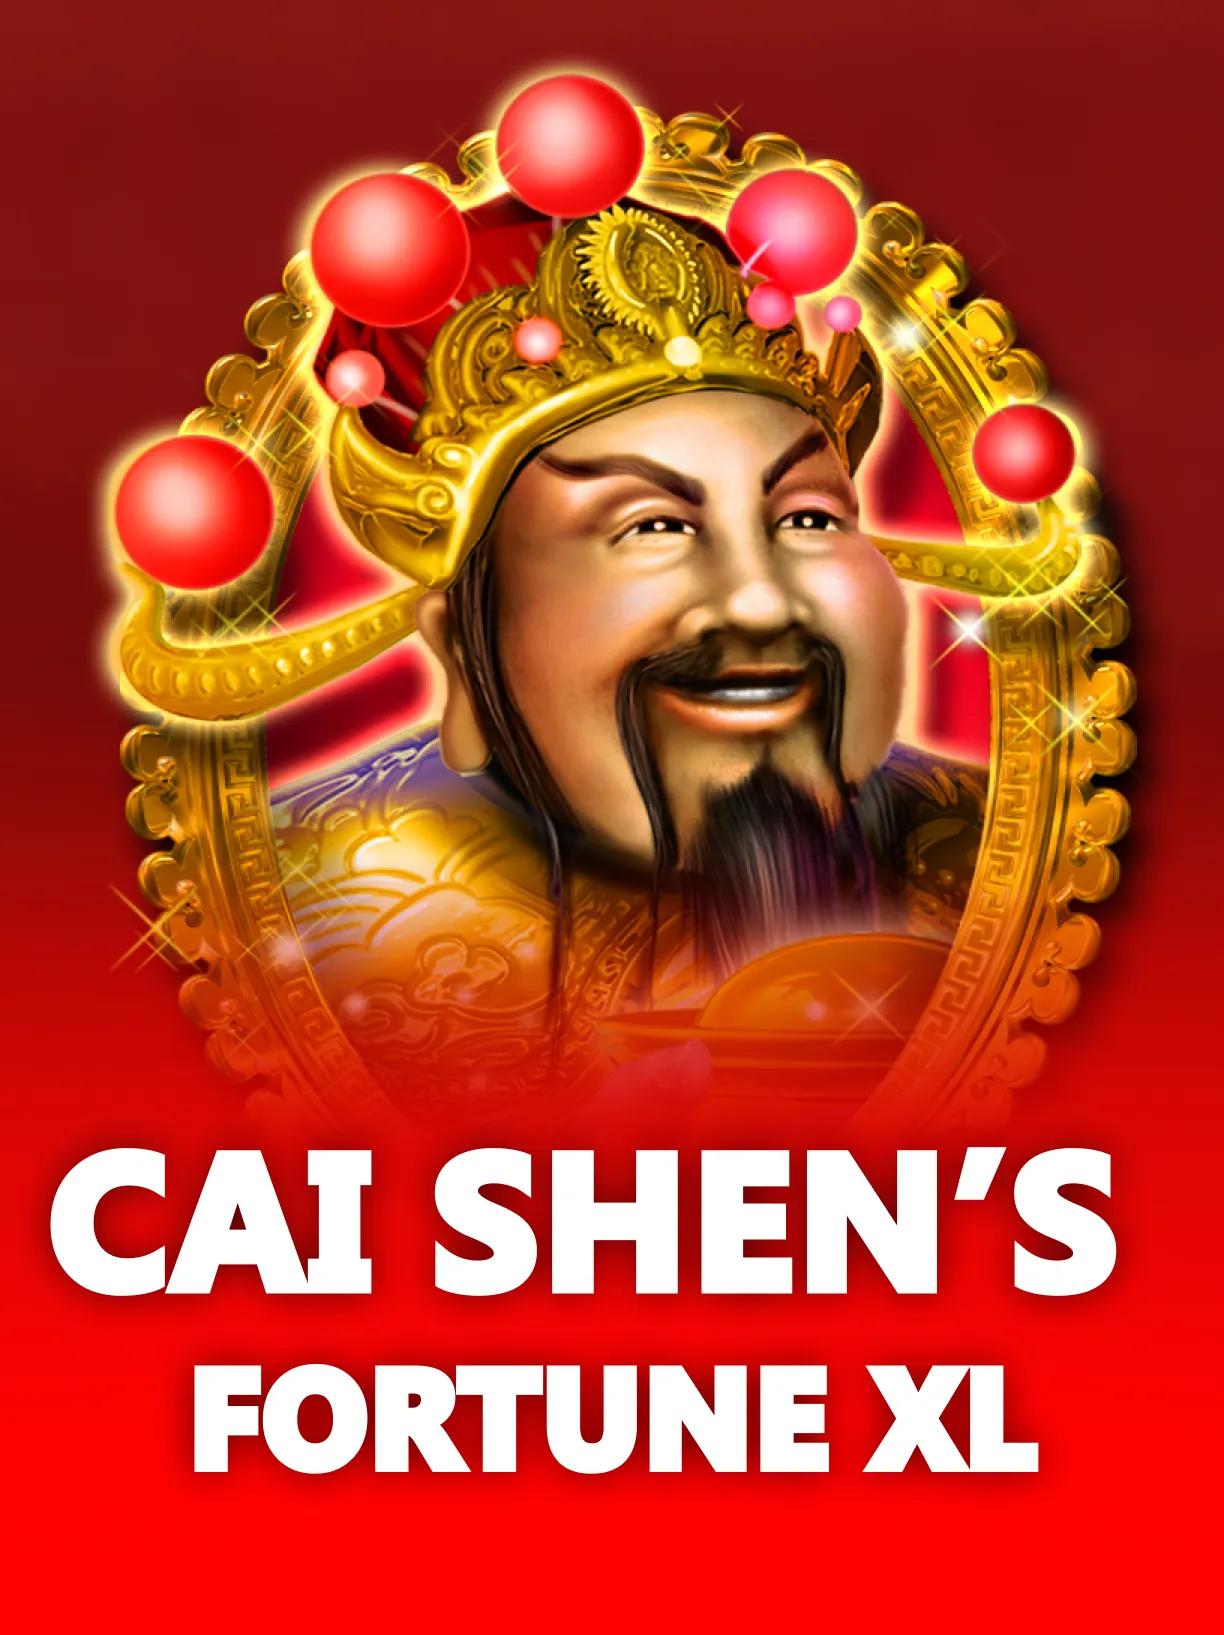 CaiShen's Fortune XL